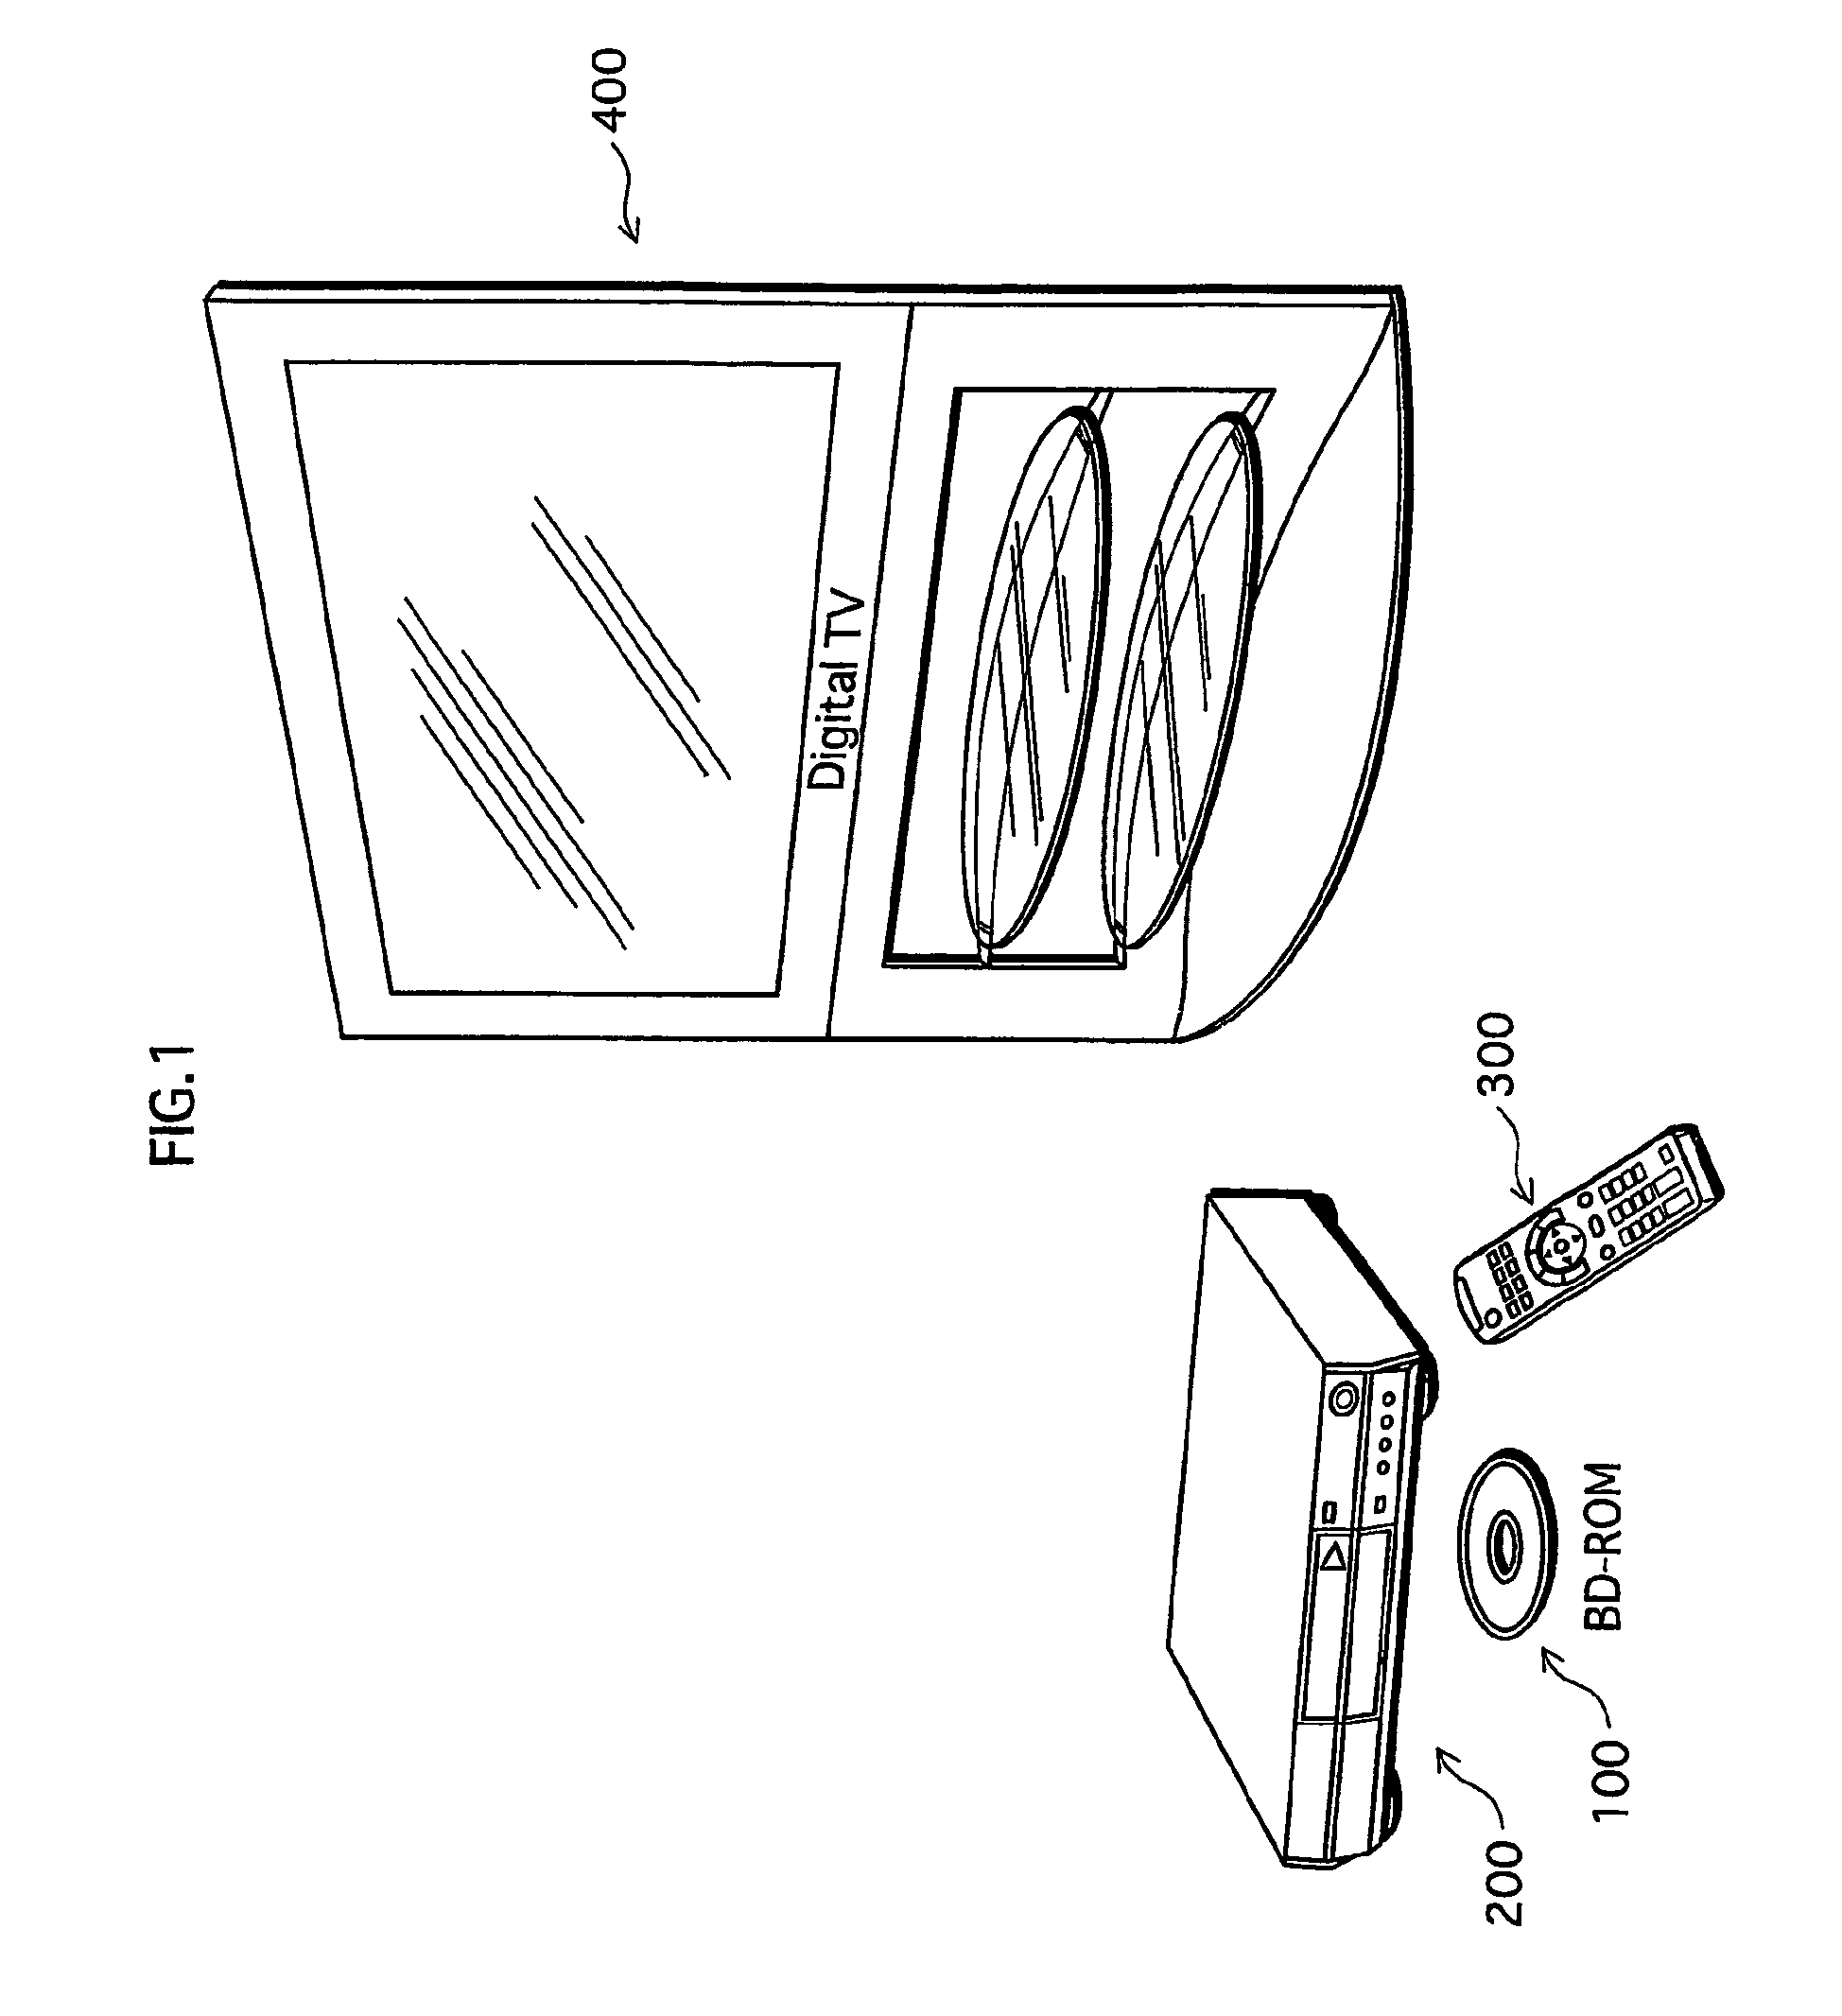 Playback apparatus for performing application-synchronized playback